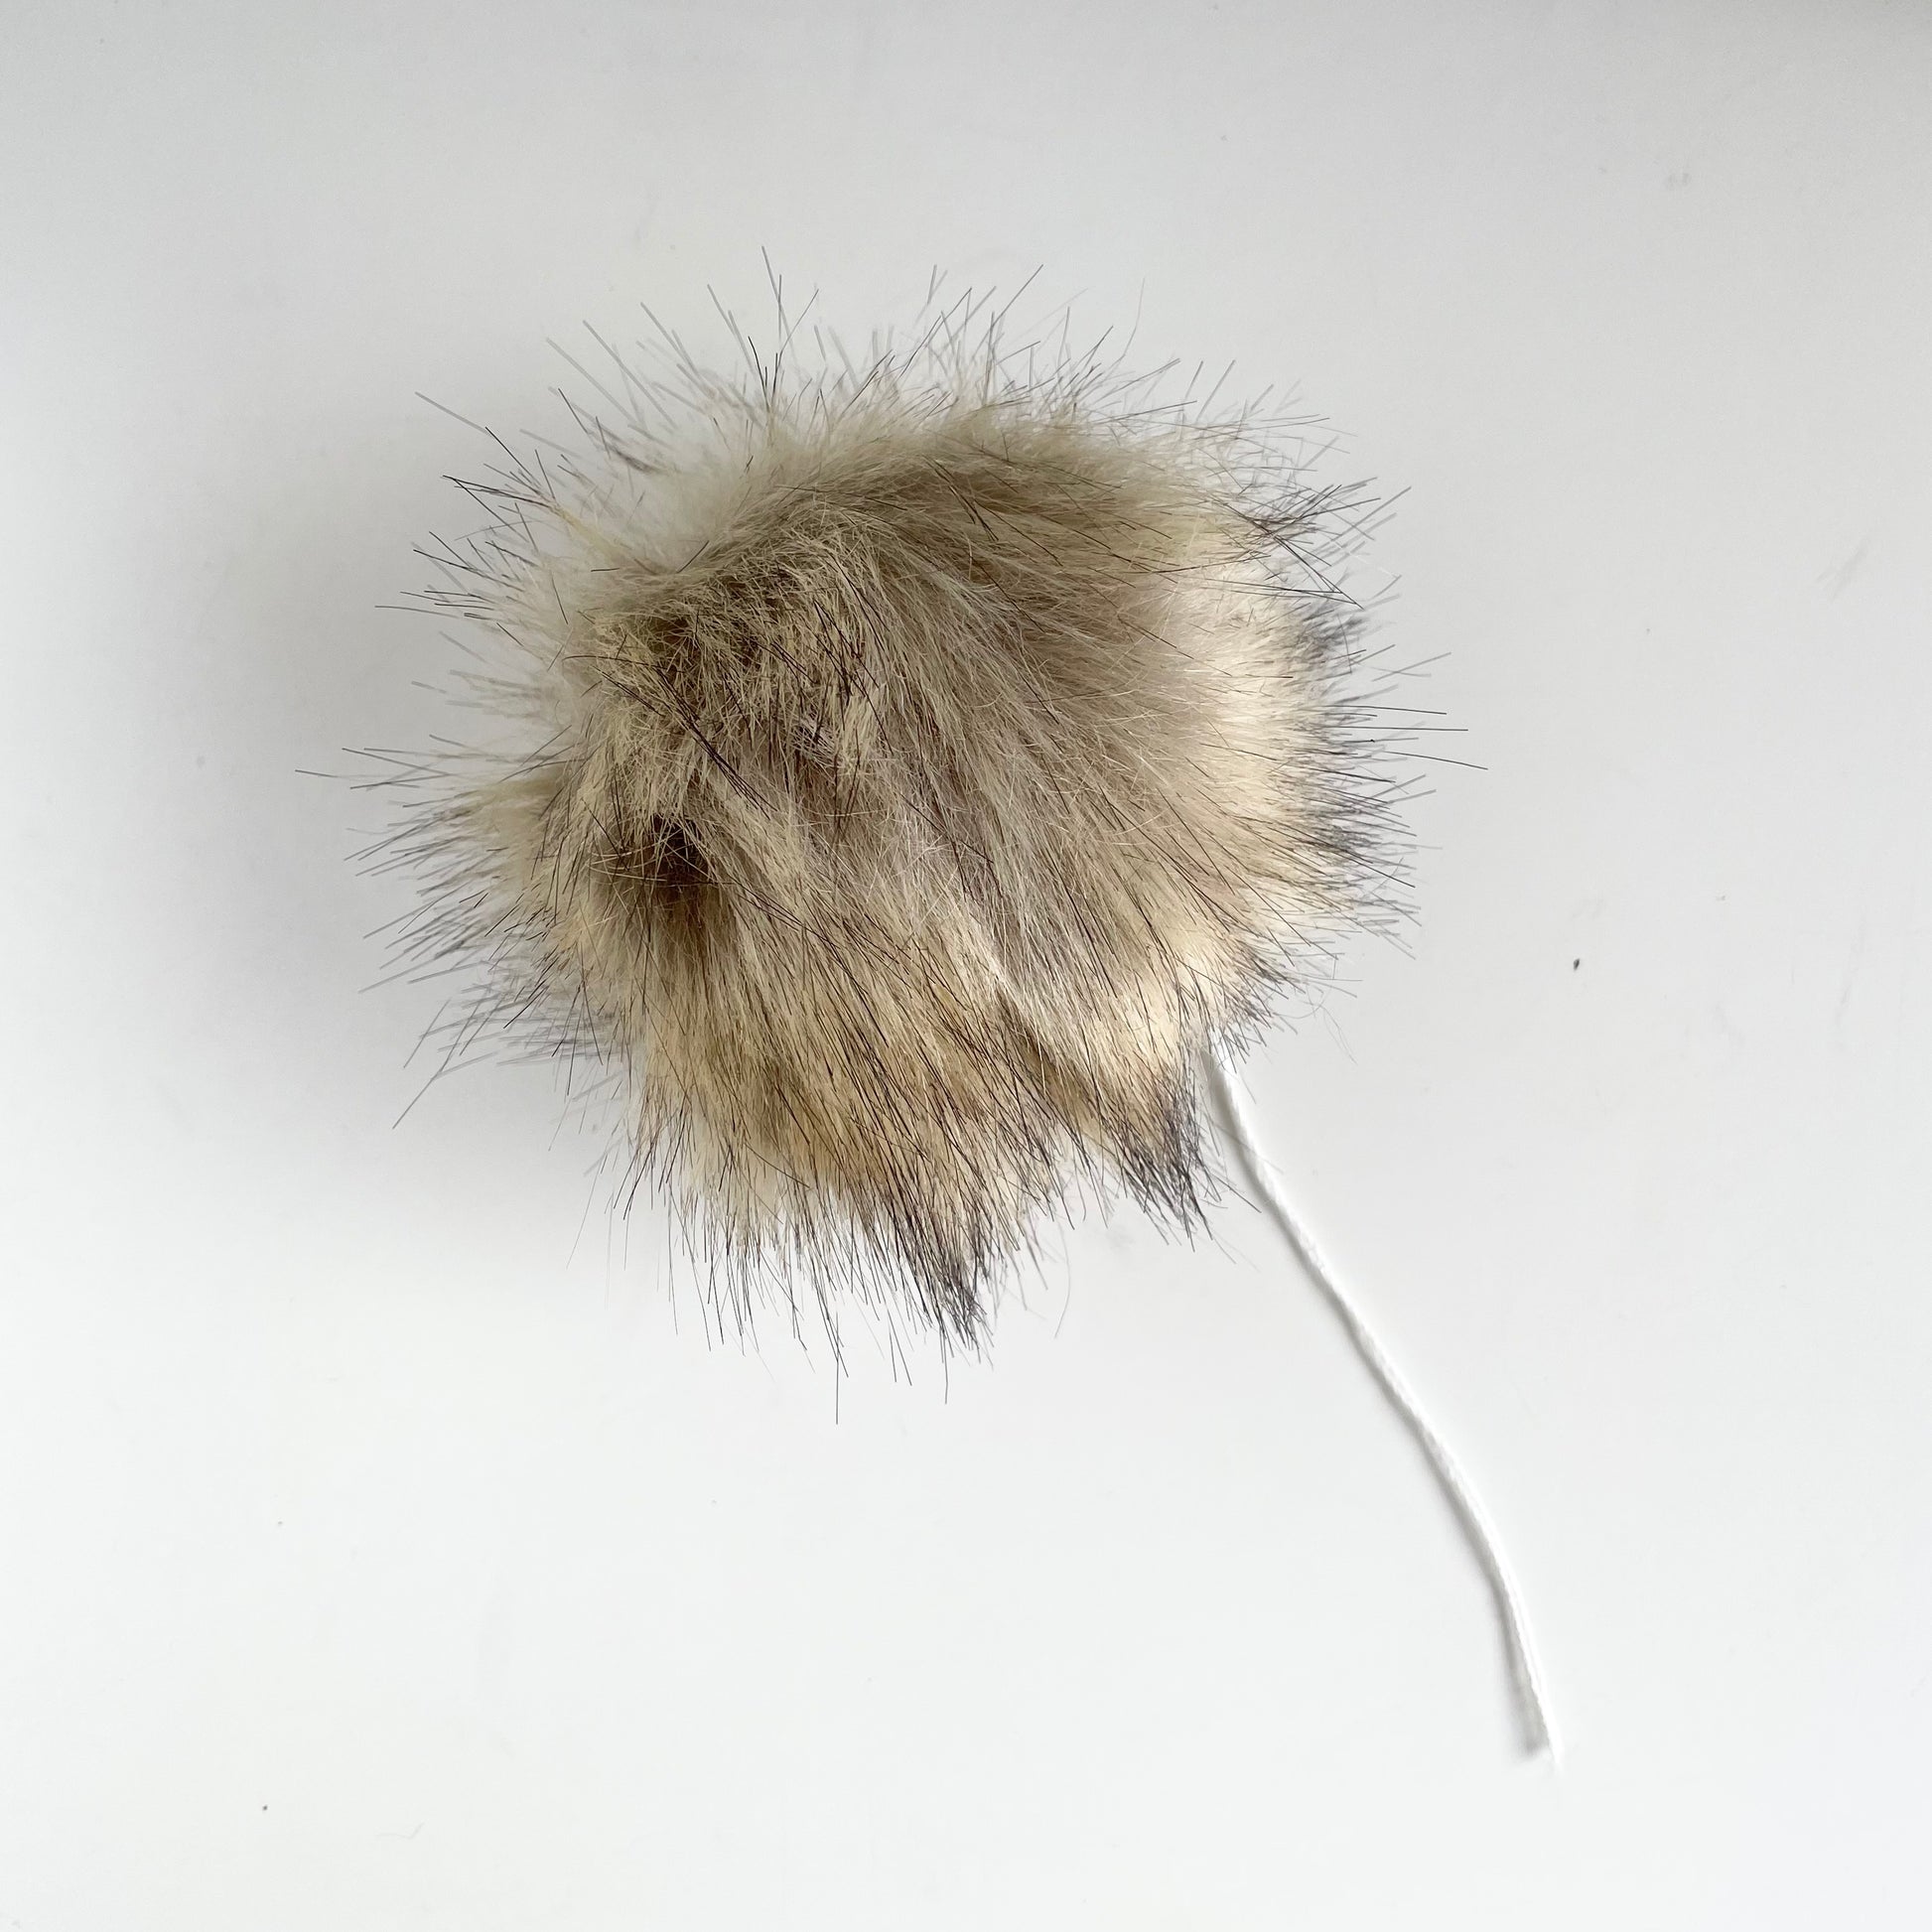 Pearl Metallic Hat with Fur Pom, Cream and Gold